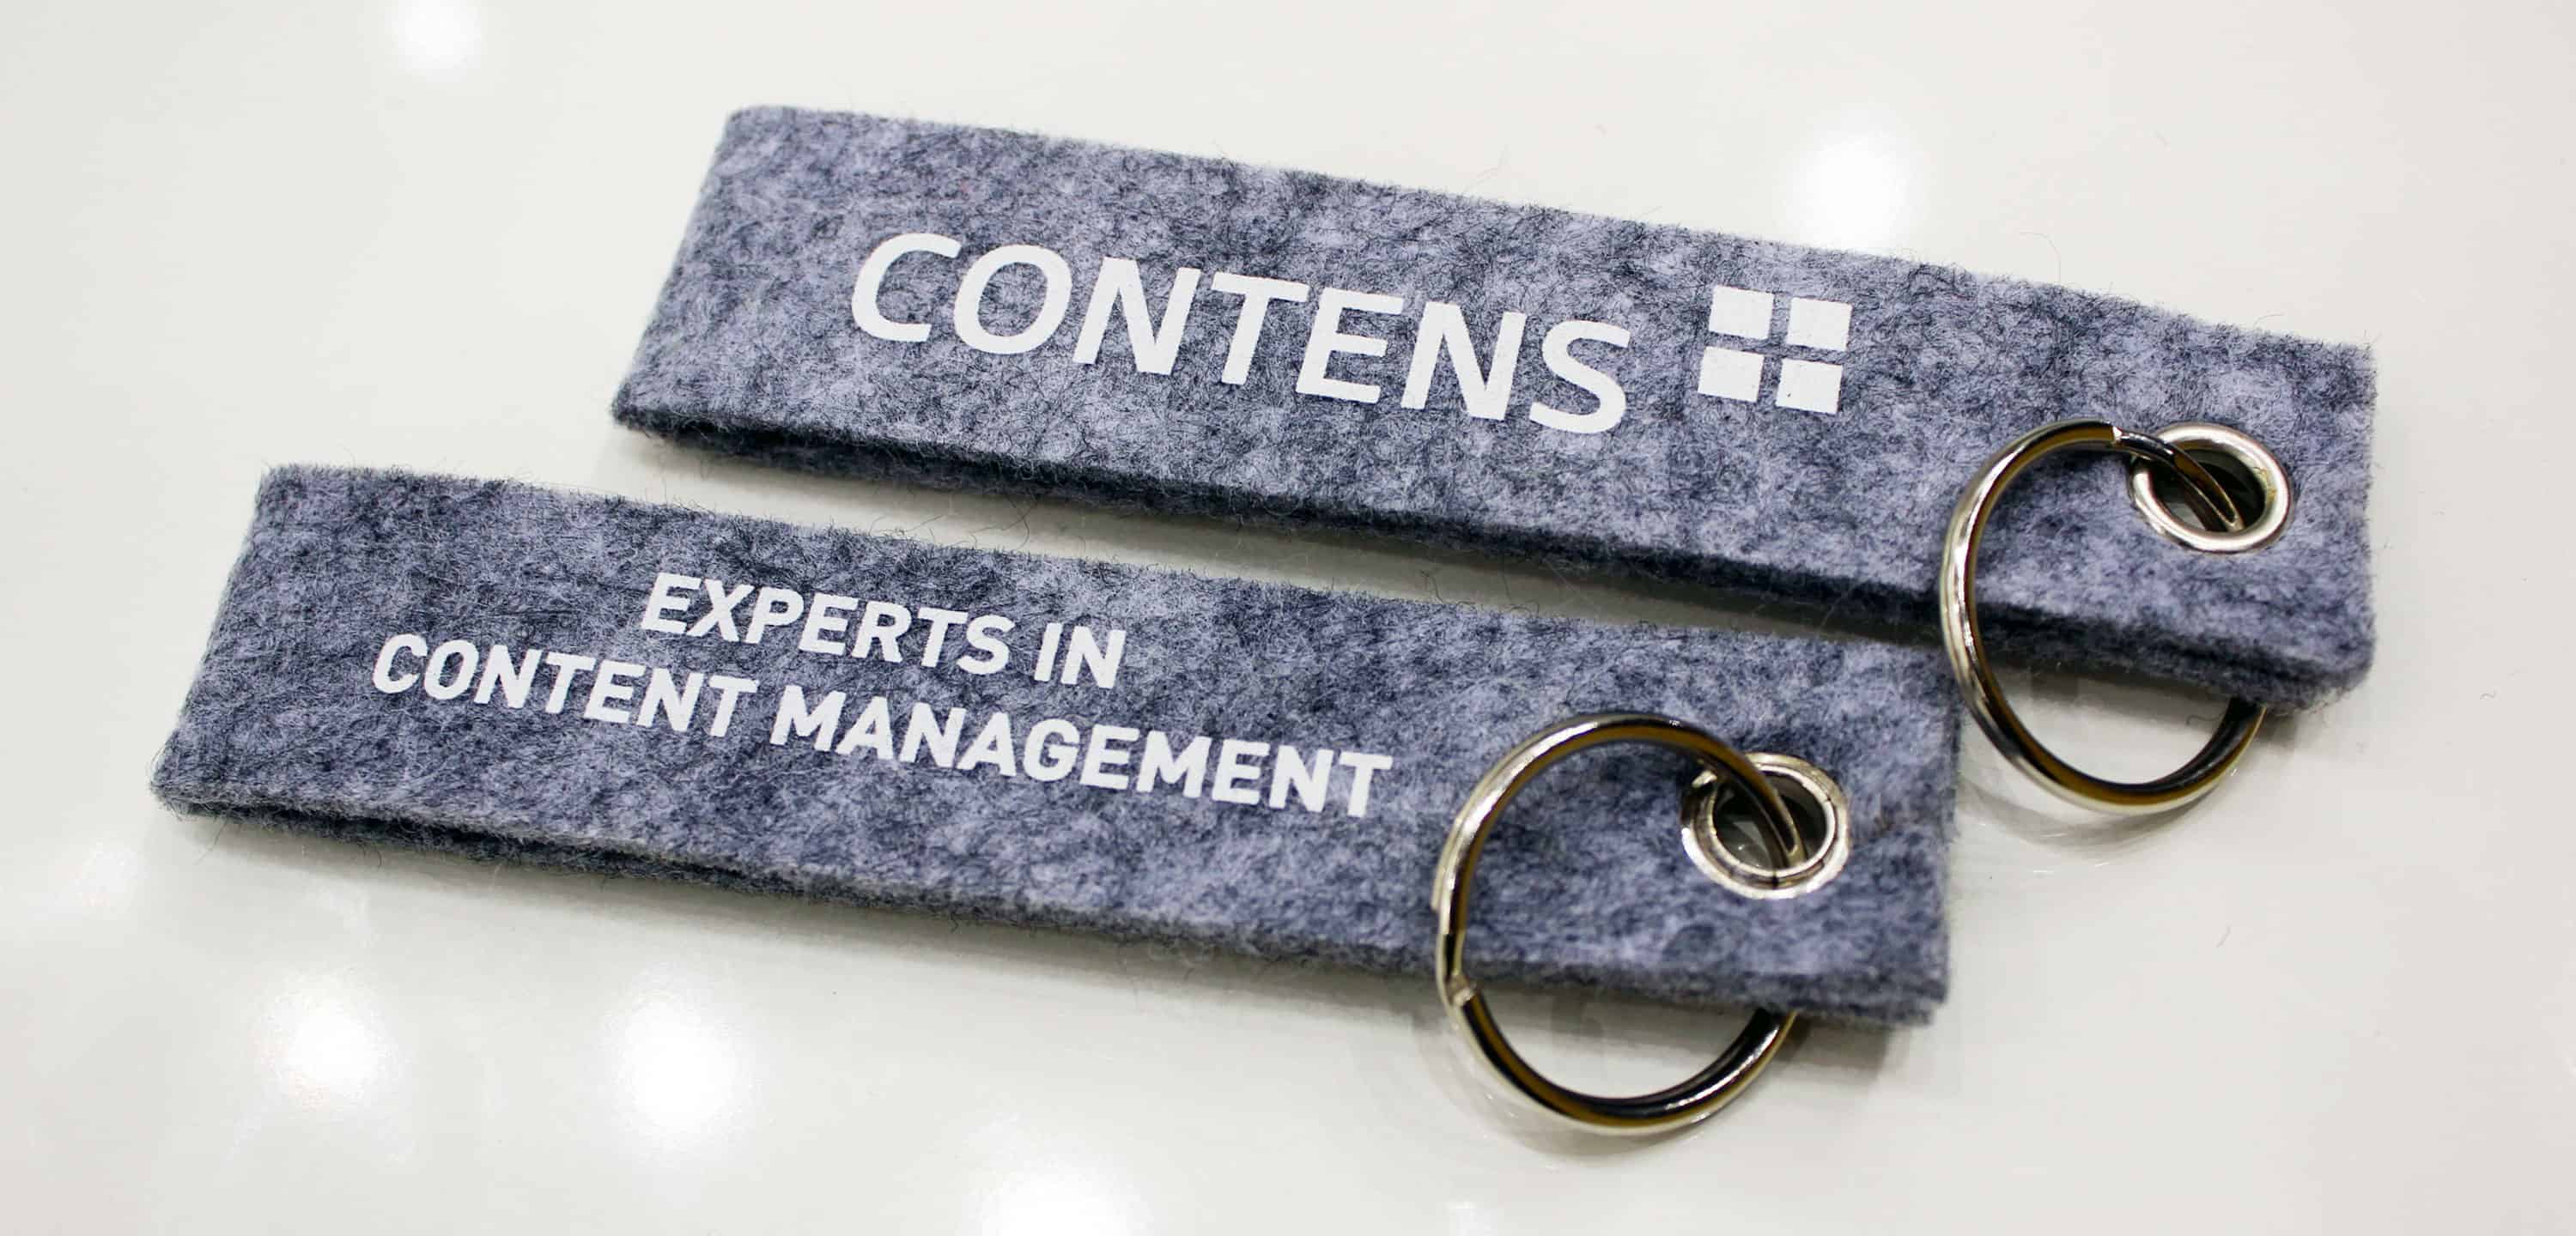 CONTENS Experts in Content Management